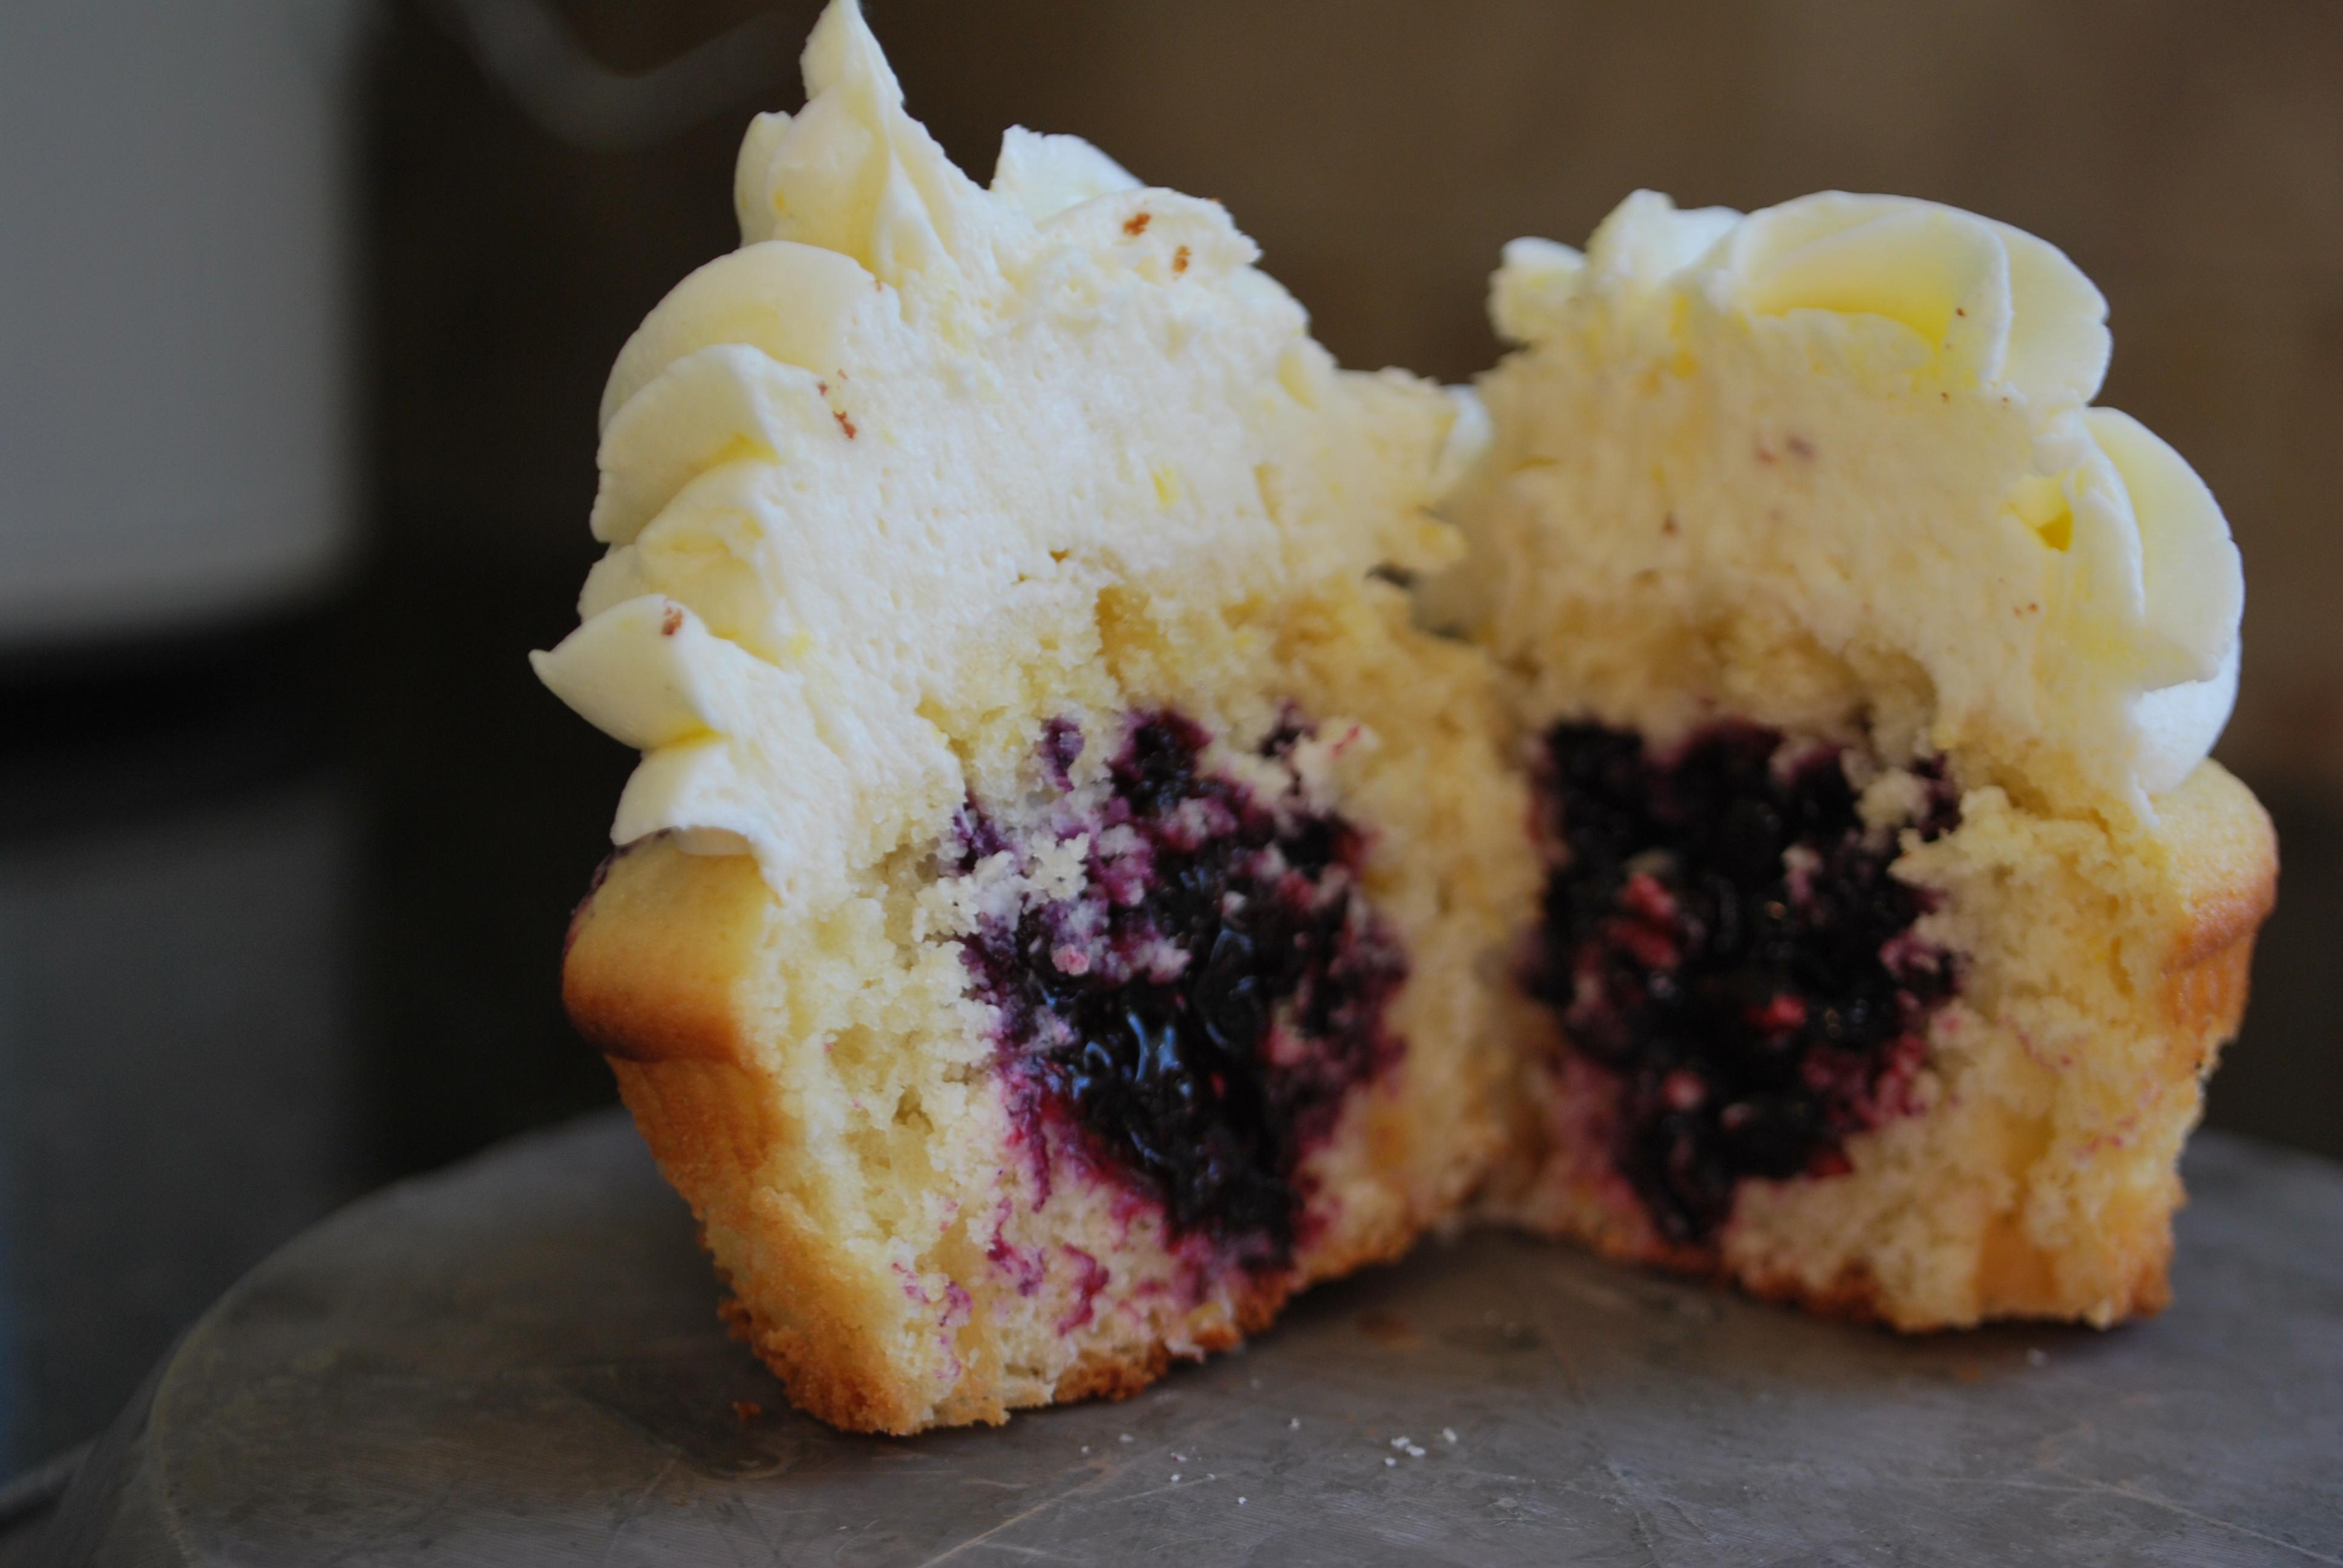 Lemon Cupcakes with Blueberry Pie Filling